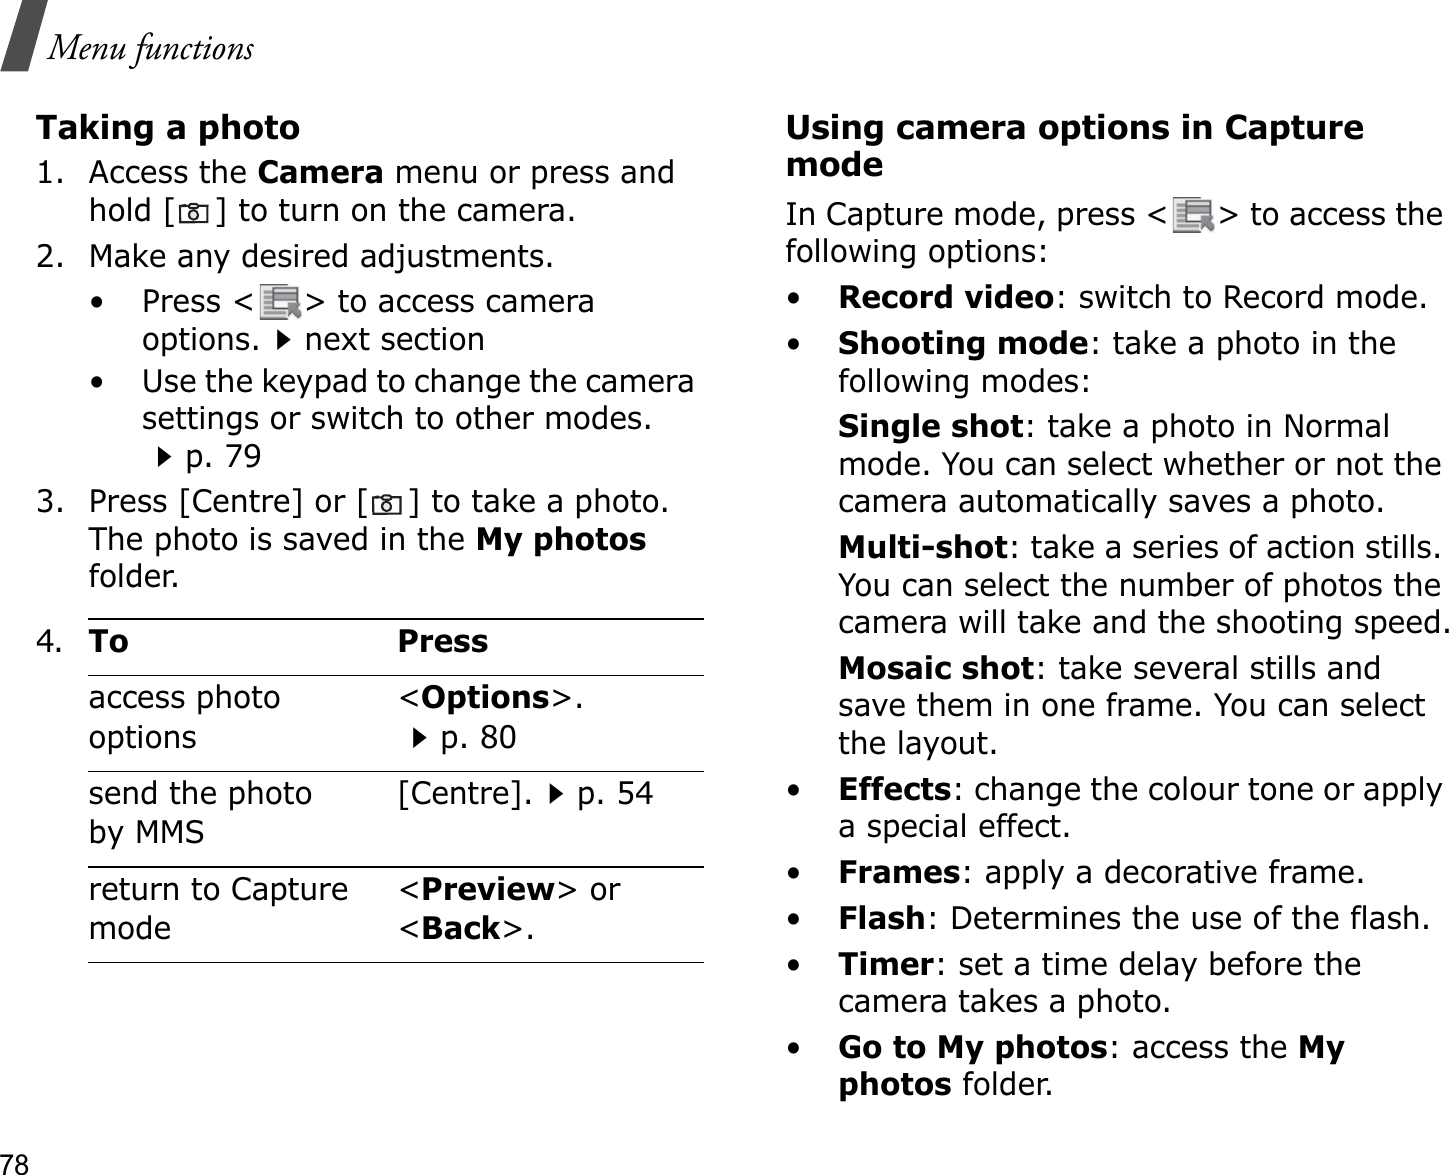 78Menu functionsTaking a photo1. Access the Camera menu or press and hold [ ] to turn on the camera.2. Make any desired adjustments.• Press &lt; &gt; to access camera options.next section• Use the keypad to change the camera settings or switch to other modes.p. 793. Press [Centre] or [ ] to take a photo. The photo is saved in the My photosfolder.Using camera options in Capture modeIn Capture mode, press &lt; &gt; to access the following options:•Record video: switch to Record mode.•Shooting mode: take a photo in the following modes:Single shot: take a photo in Normal mode. You can select whether or not the camera automatically saves a photo.Multi-shot: take a series of action stills. You can select the number of photos the camera will take and the shooting speed.Mosaic shot: take several stills and save them in one frame. You can select the layout.•Effects: change the colour tone or apply a special effect.•Frames: apply a decorative frame.•Flash: Determines the use of the flash.•Timer: set a time delay before the camera takes a photo.•Go to My photos: access the Myphotos folder.4.To Pressaccess photo options&lt;Options&gt;.p. 80send the photo by MMS[Centre].p. 54return to Capture mode&lt;Preview&gt; or &lt;Back&gt;.